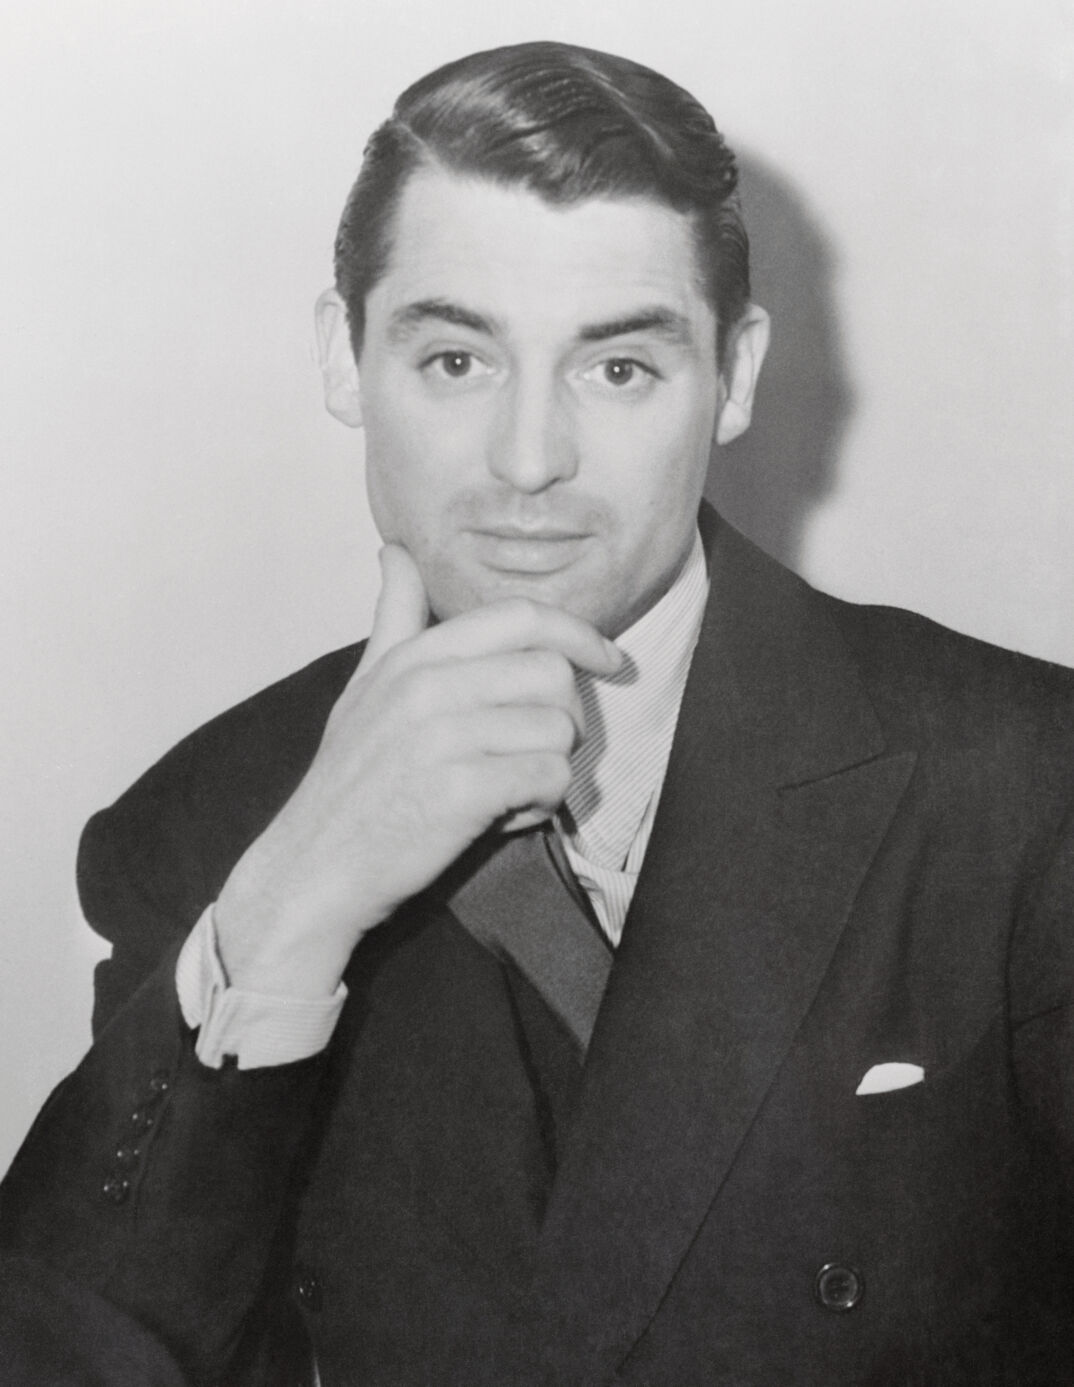 (Original Caption) Cary Grant, film star, is pictured as he appeared in court, December 12th, answering the suit of Virginia Cherrill who seeks $1,000 a month pending hearing of her suit for separate maintenance. Judge Dudley S. Valentine awarded Miss Cherrill $167.50 a week from Grant and ordered him to pay attorney's fees and court costs, pending trial of her suit. Miss Cherrill charged that Grant showed no concern for her welfare or comfort.